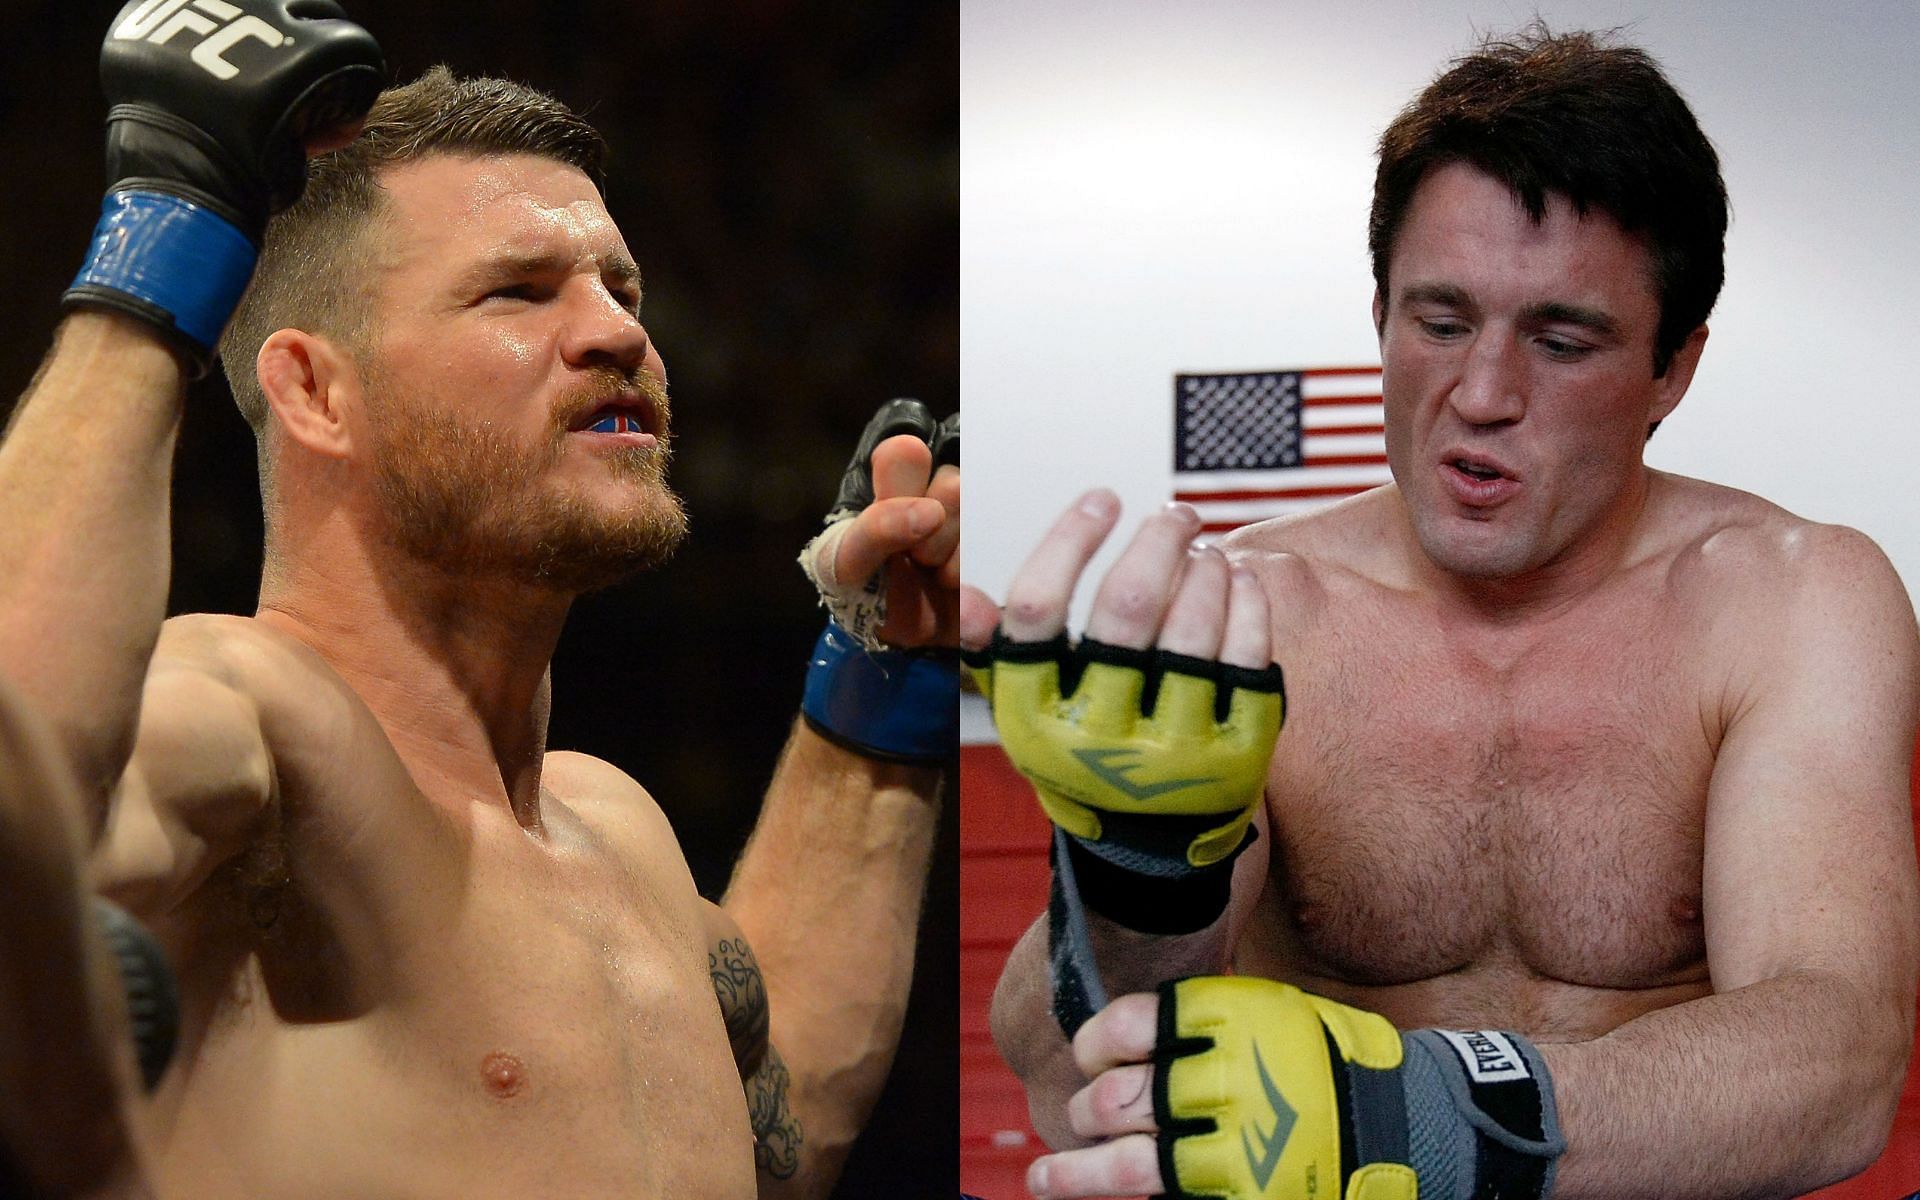 Michael Bisping (left) and Chael Sonnen (right) (Images via Getty)